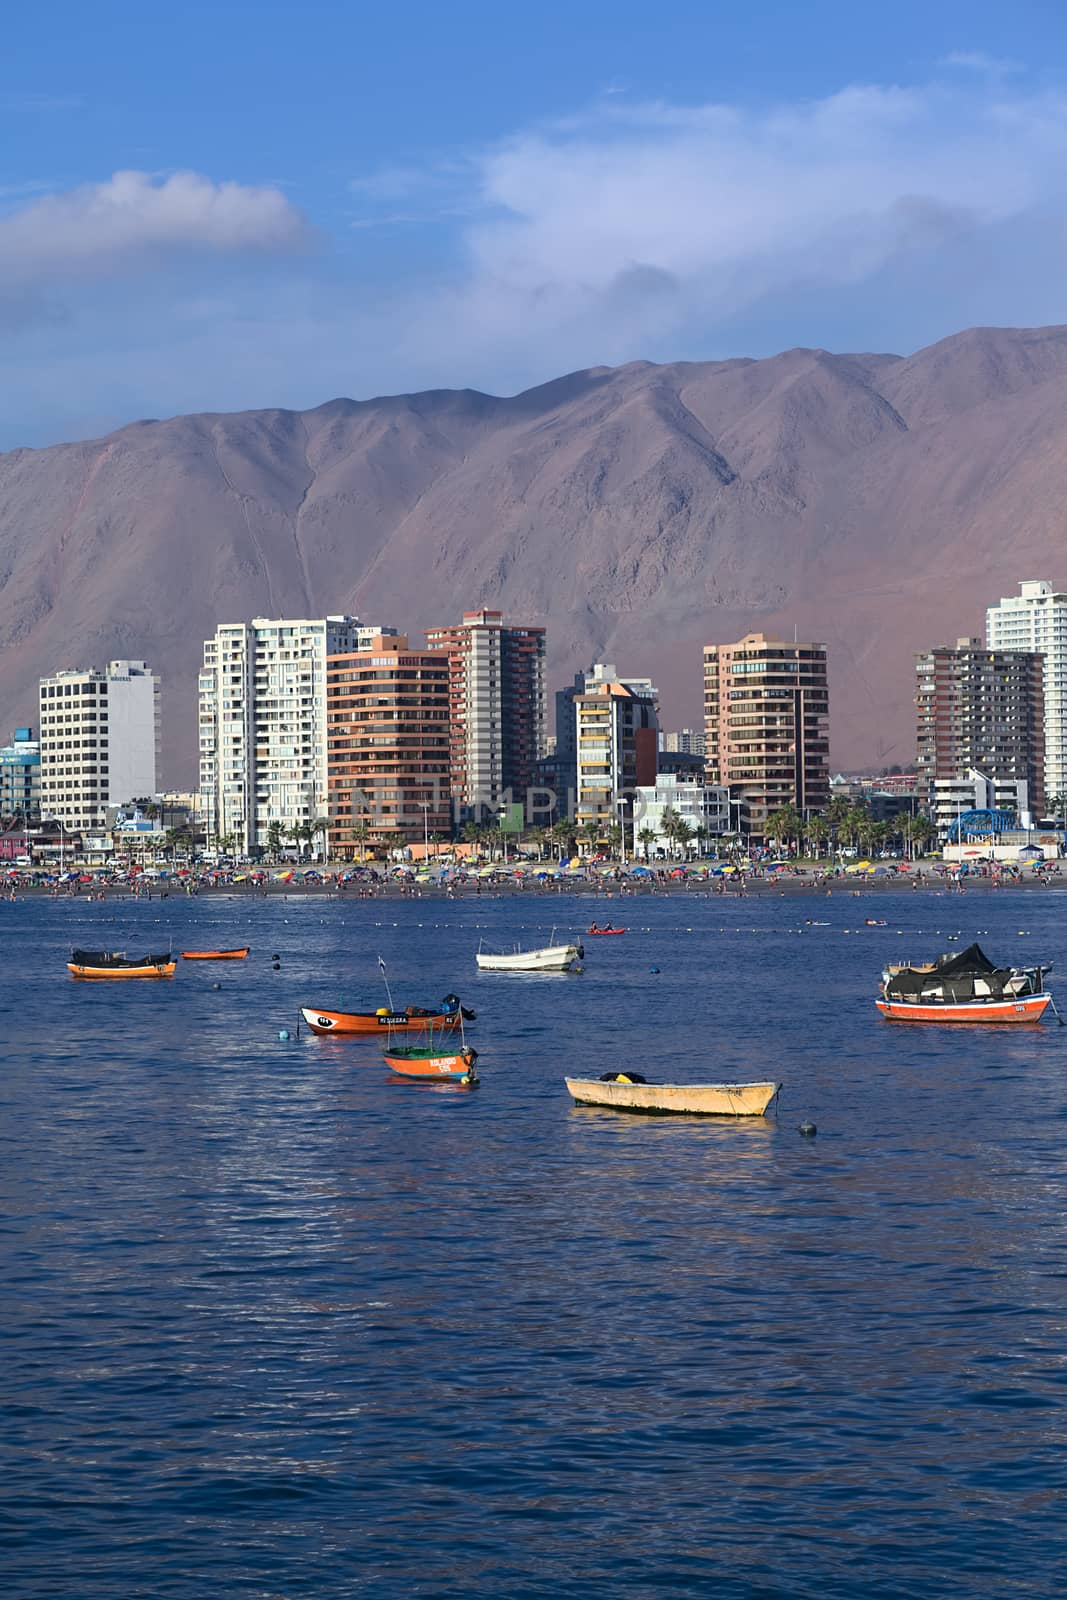 IQUIQUE, CHILE - JANUARY 23, 2015: View from the peninsula at the end of Cavancha beach over the fishing boats anchoring in the bay, Cavancha beach and the modern tall buildings along Arturo Prat Chacon Avenue on January 23, 2015 in Iquique, Chile. Iquique is a popular beach town and free port city in Northern Chile. 